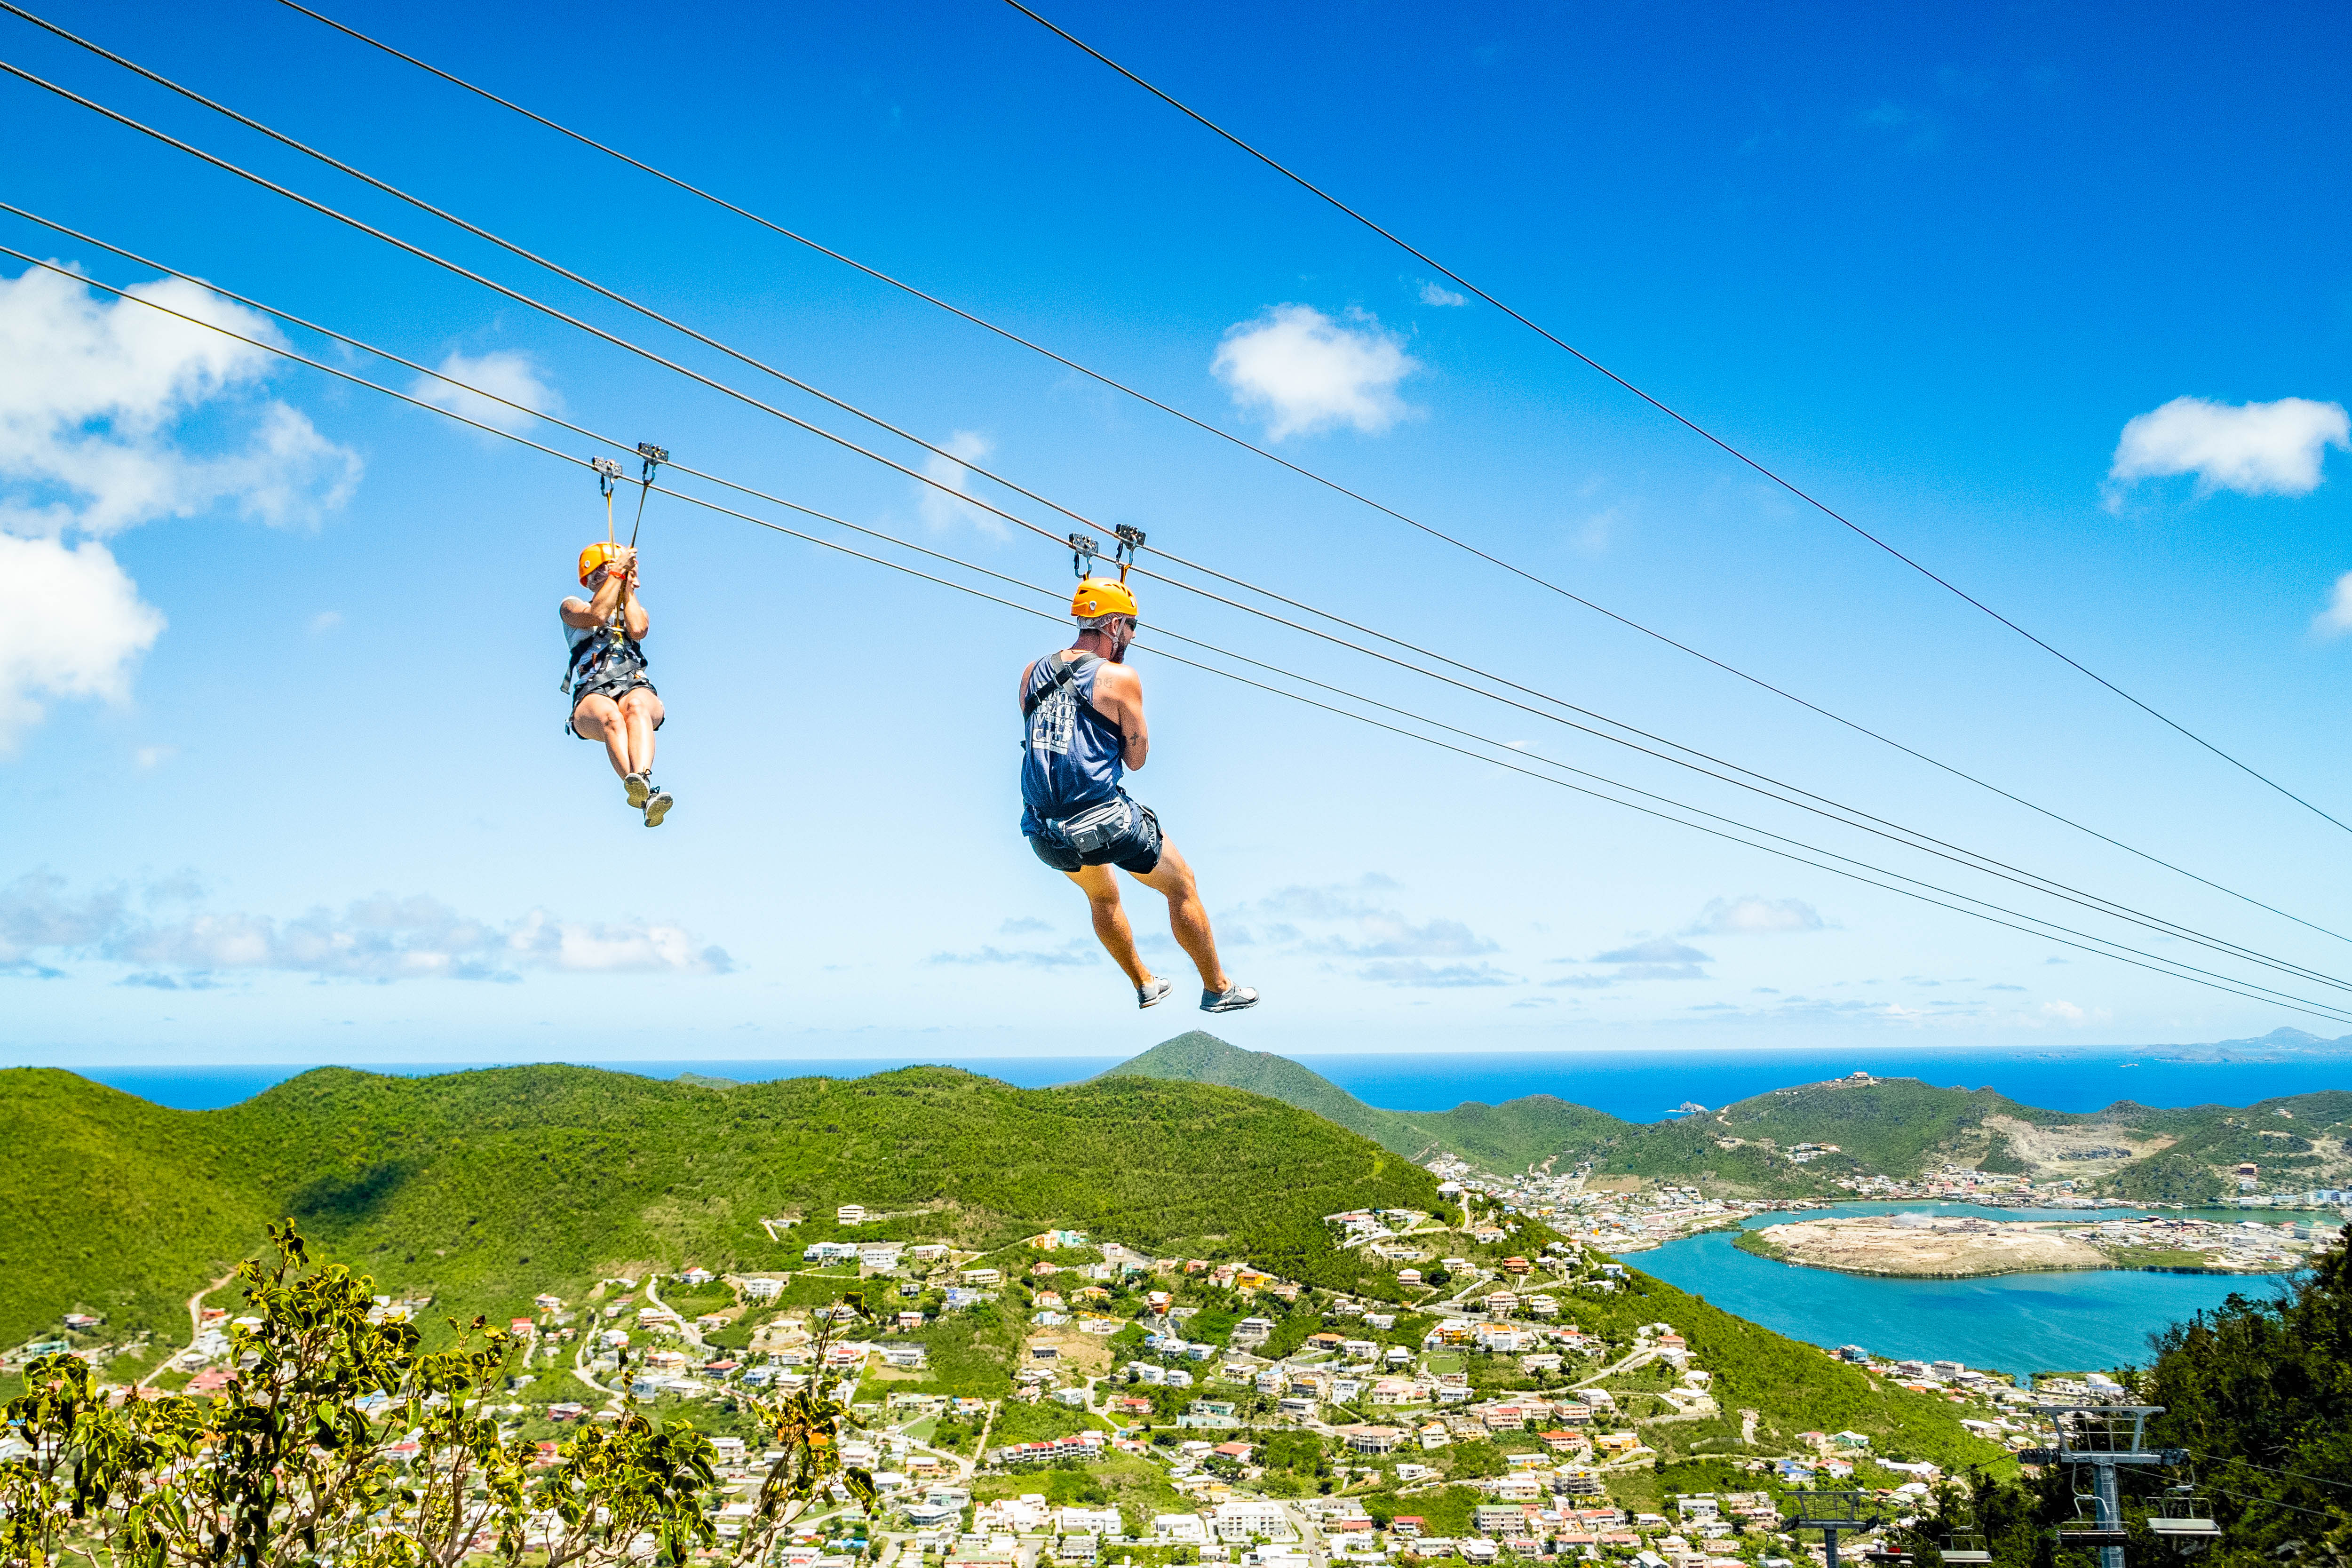 The Sentry Hill Zipline combines the sensational landscape with exciting adventure at Rainforest Adventures Rockland Estate in St. Maarten.